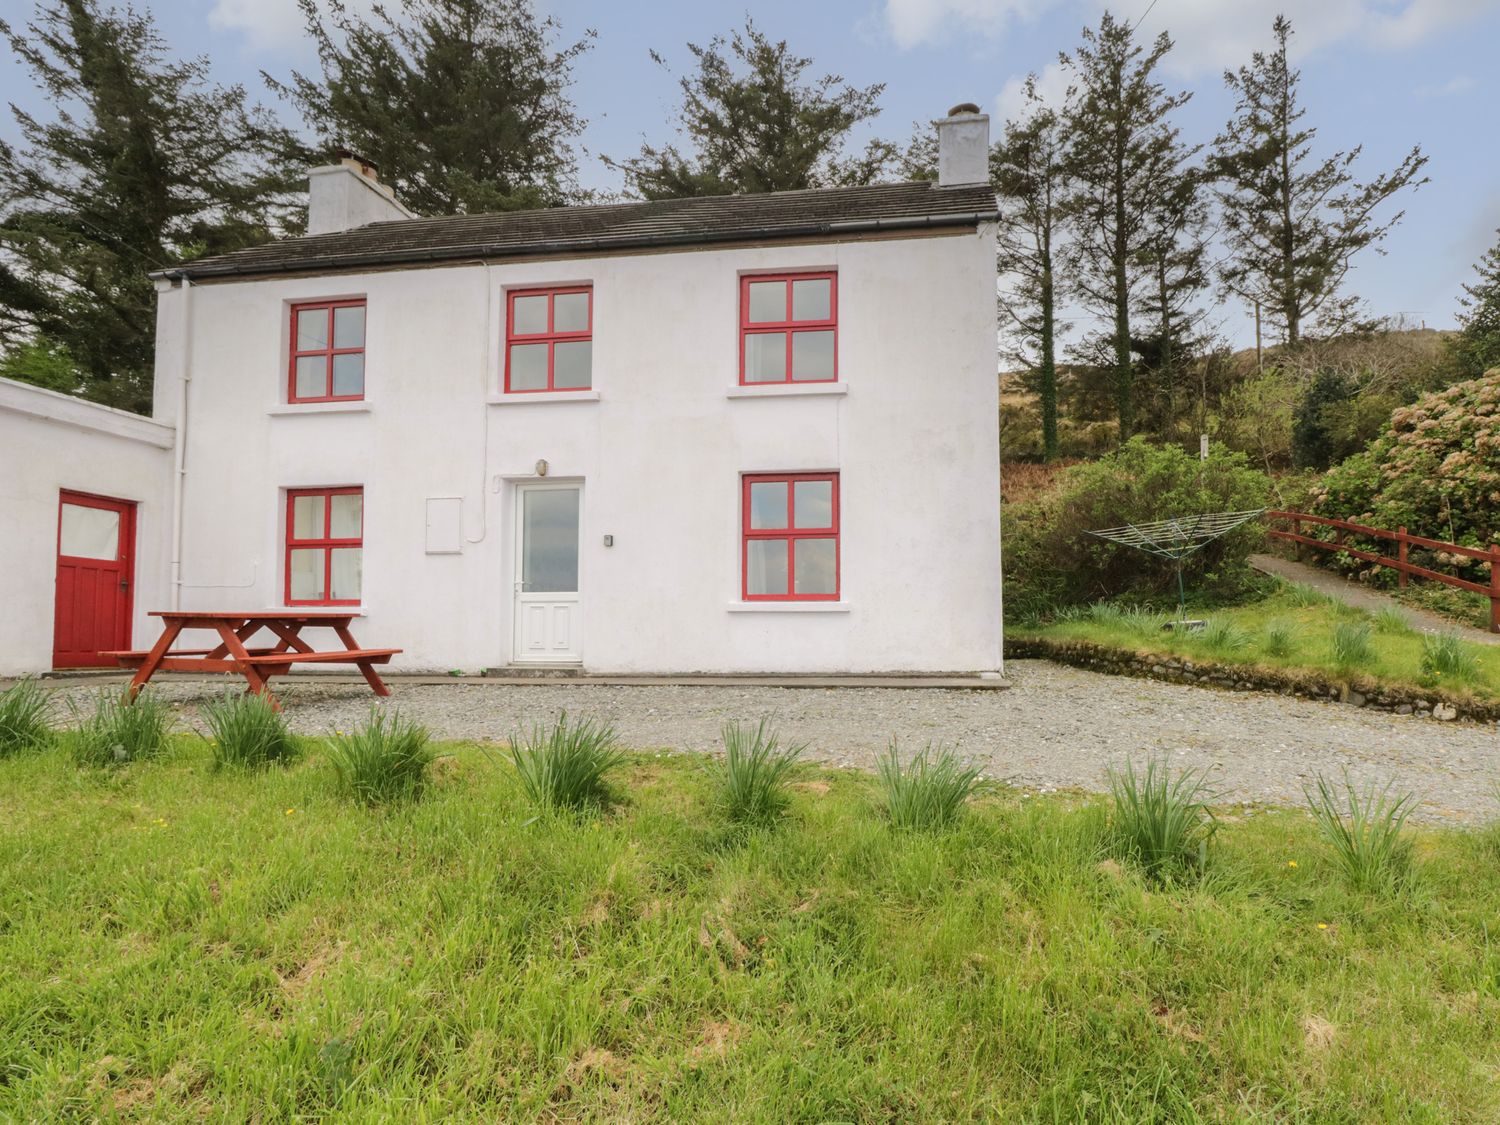 Sea View House - Shancroagh & County Galway - 1133044 - photo 1